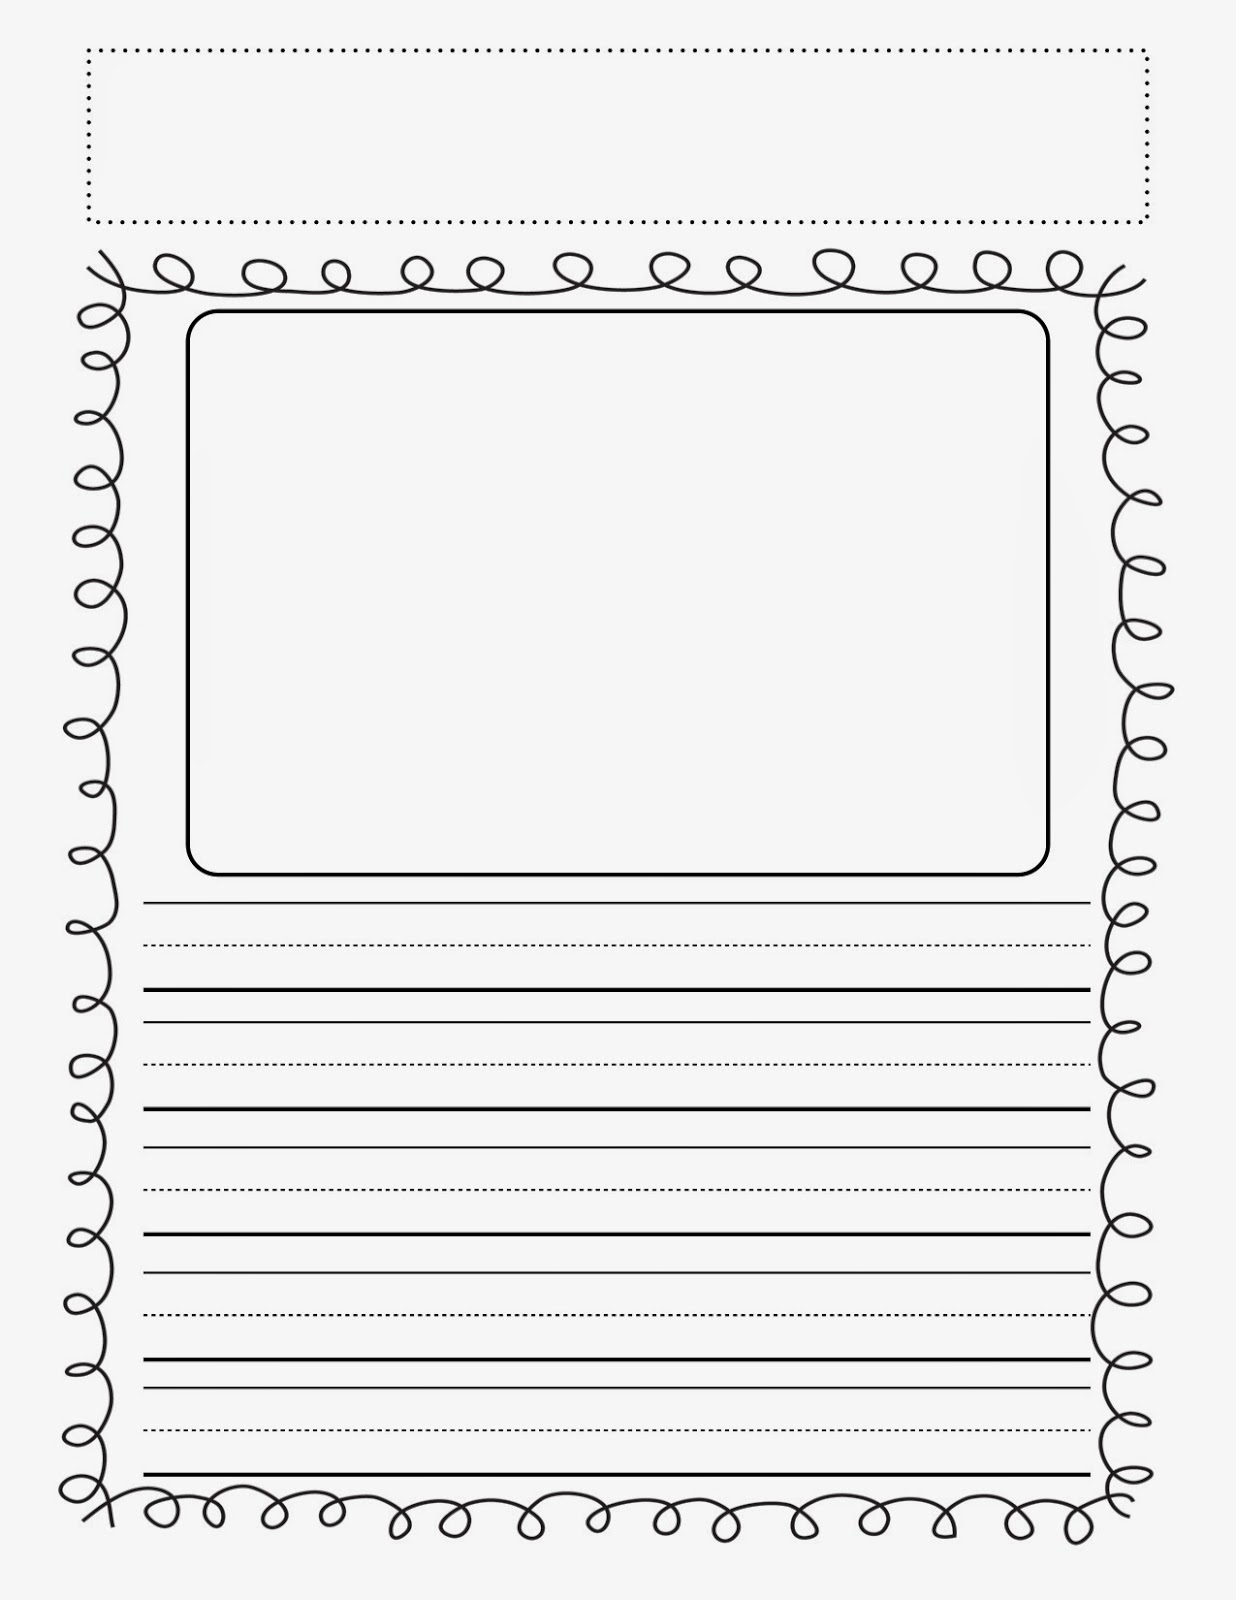 story-paper-printable-printable-word-searches